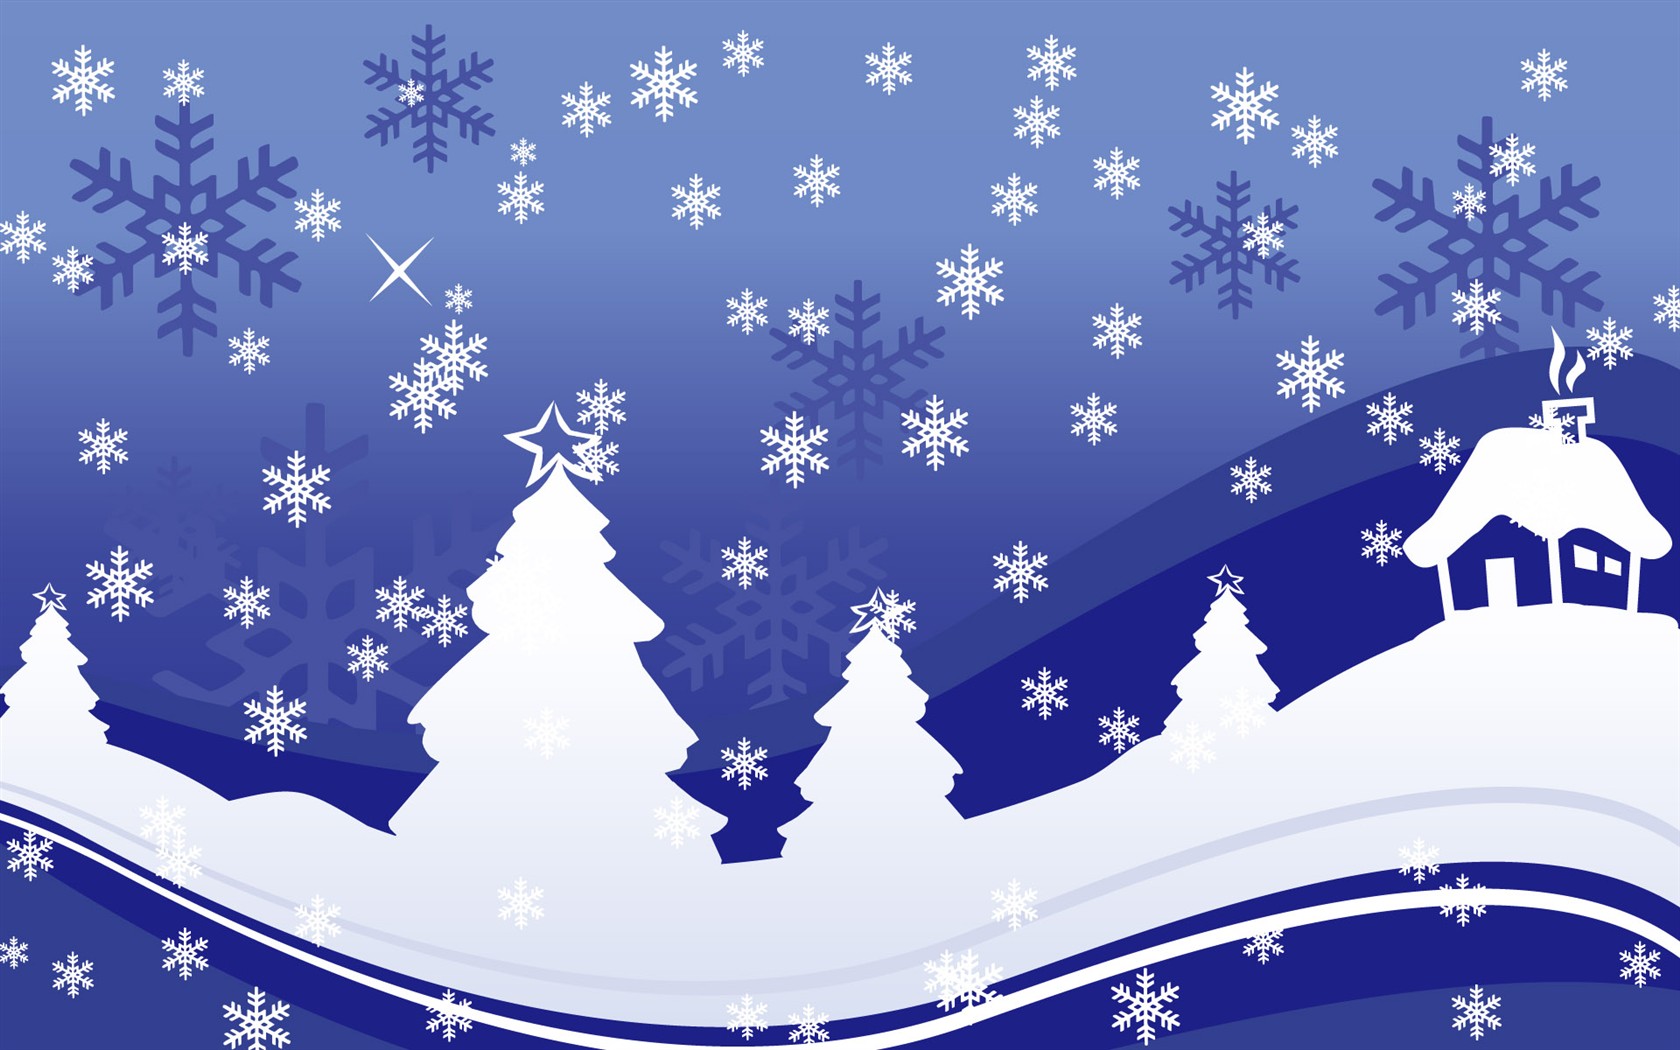 Exquisite Christmas Theme HD Wallpapers #33 - 1680x1050